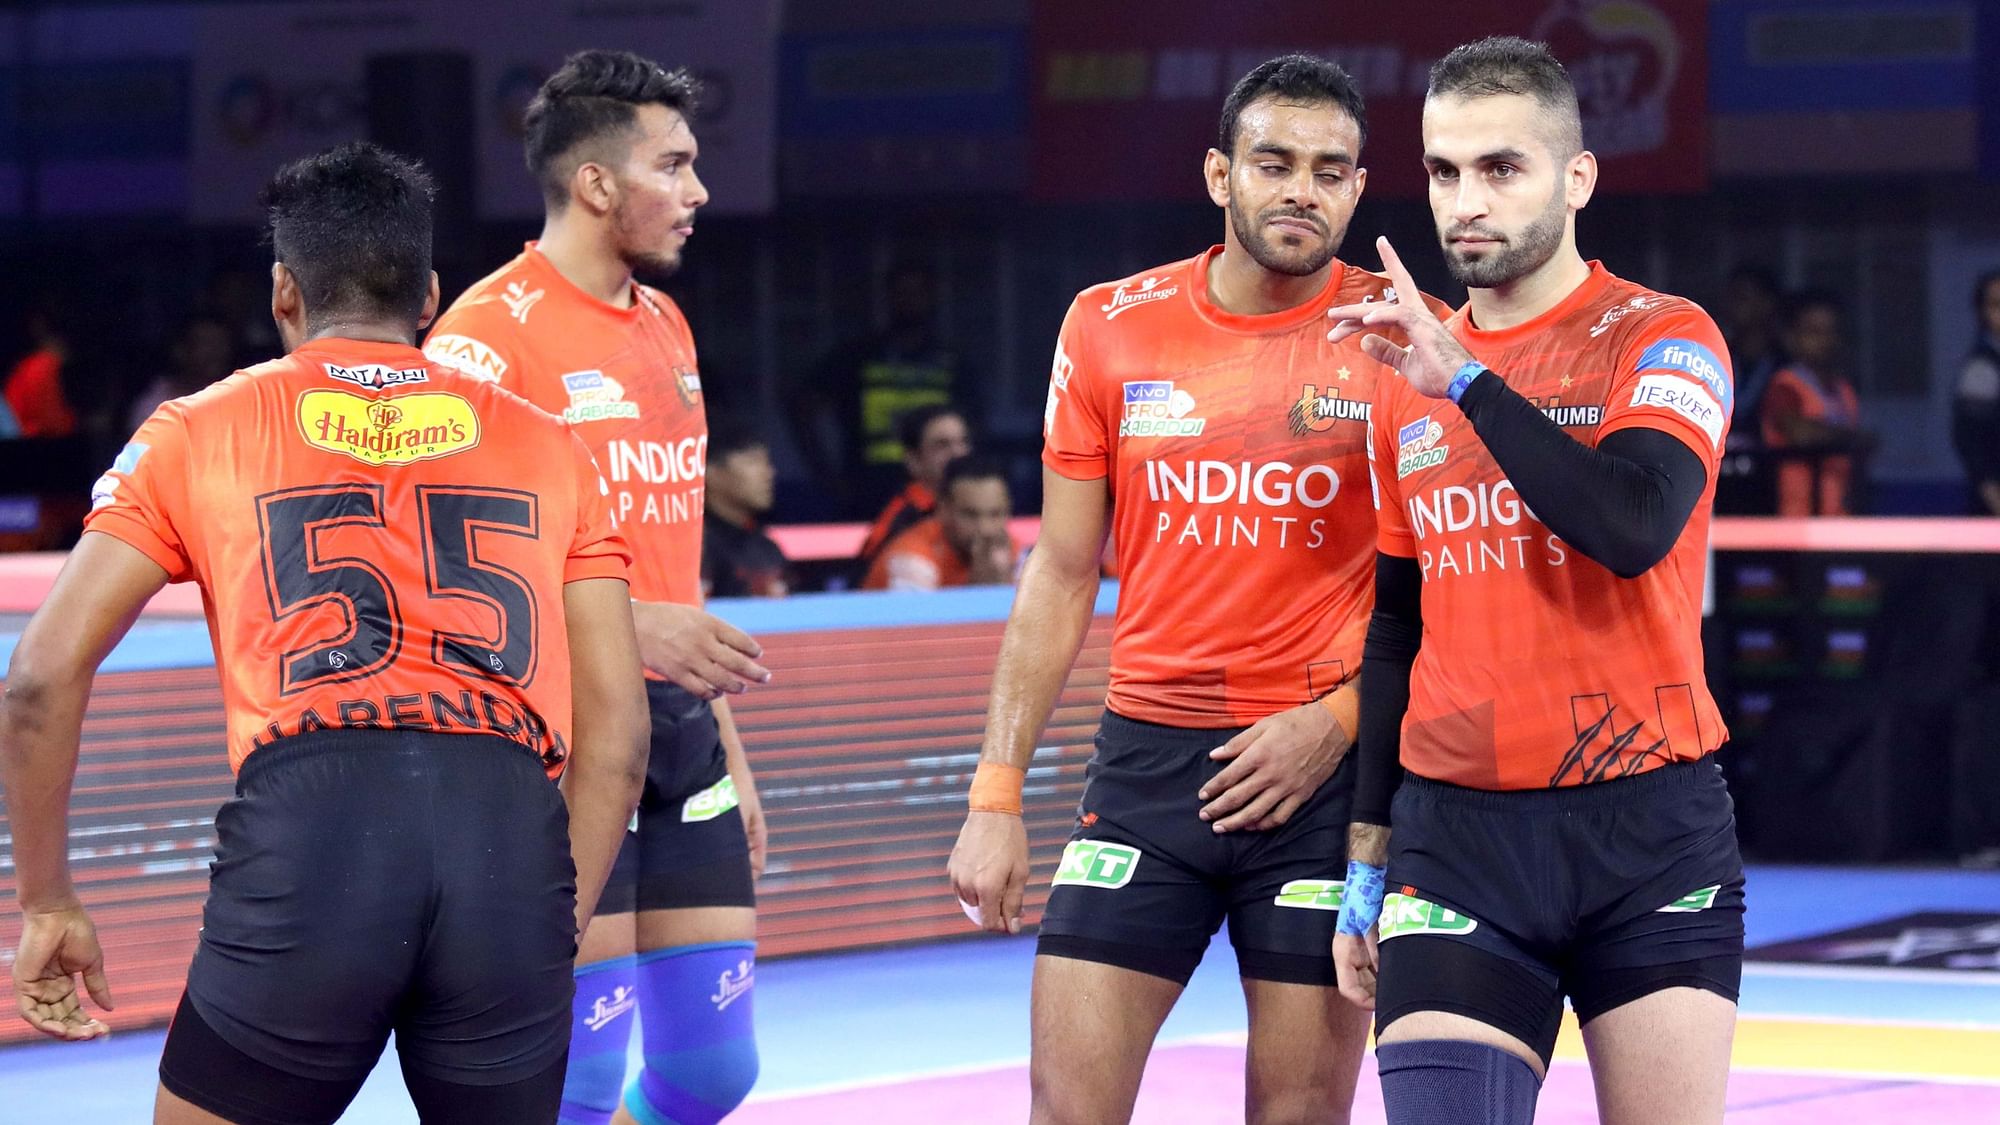 Iranian defender Fazel Atrachali clinched a ‘High Five’ and led their defence with perfection to help U Mumba beat Telugu Titans 41-27 